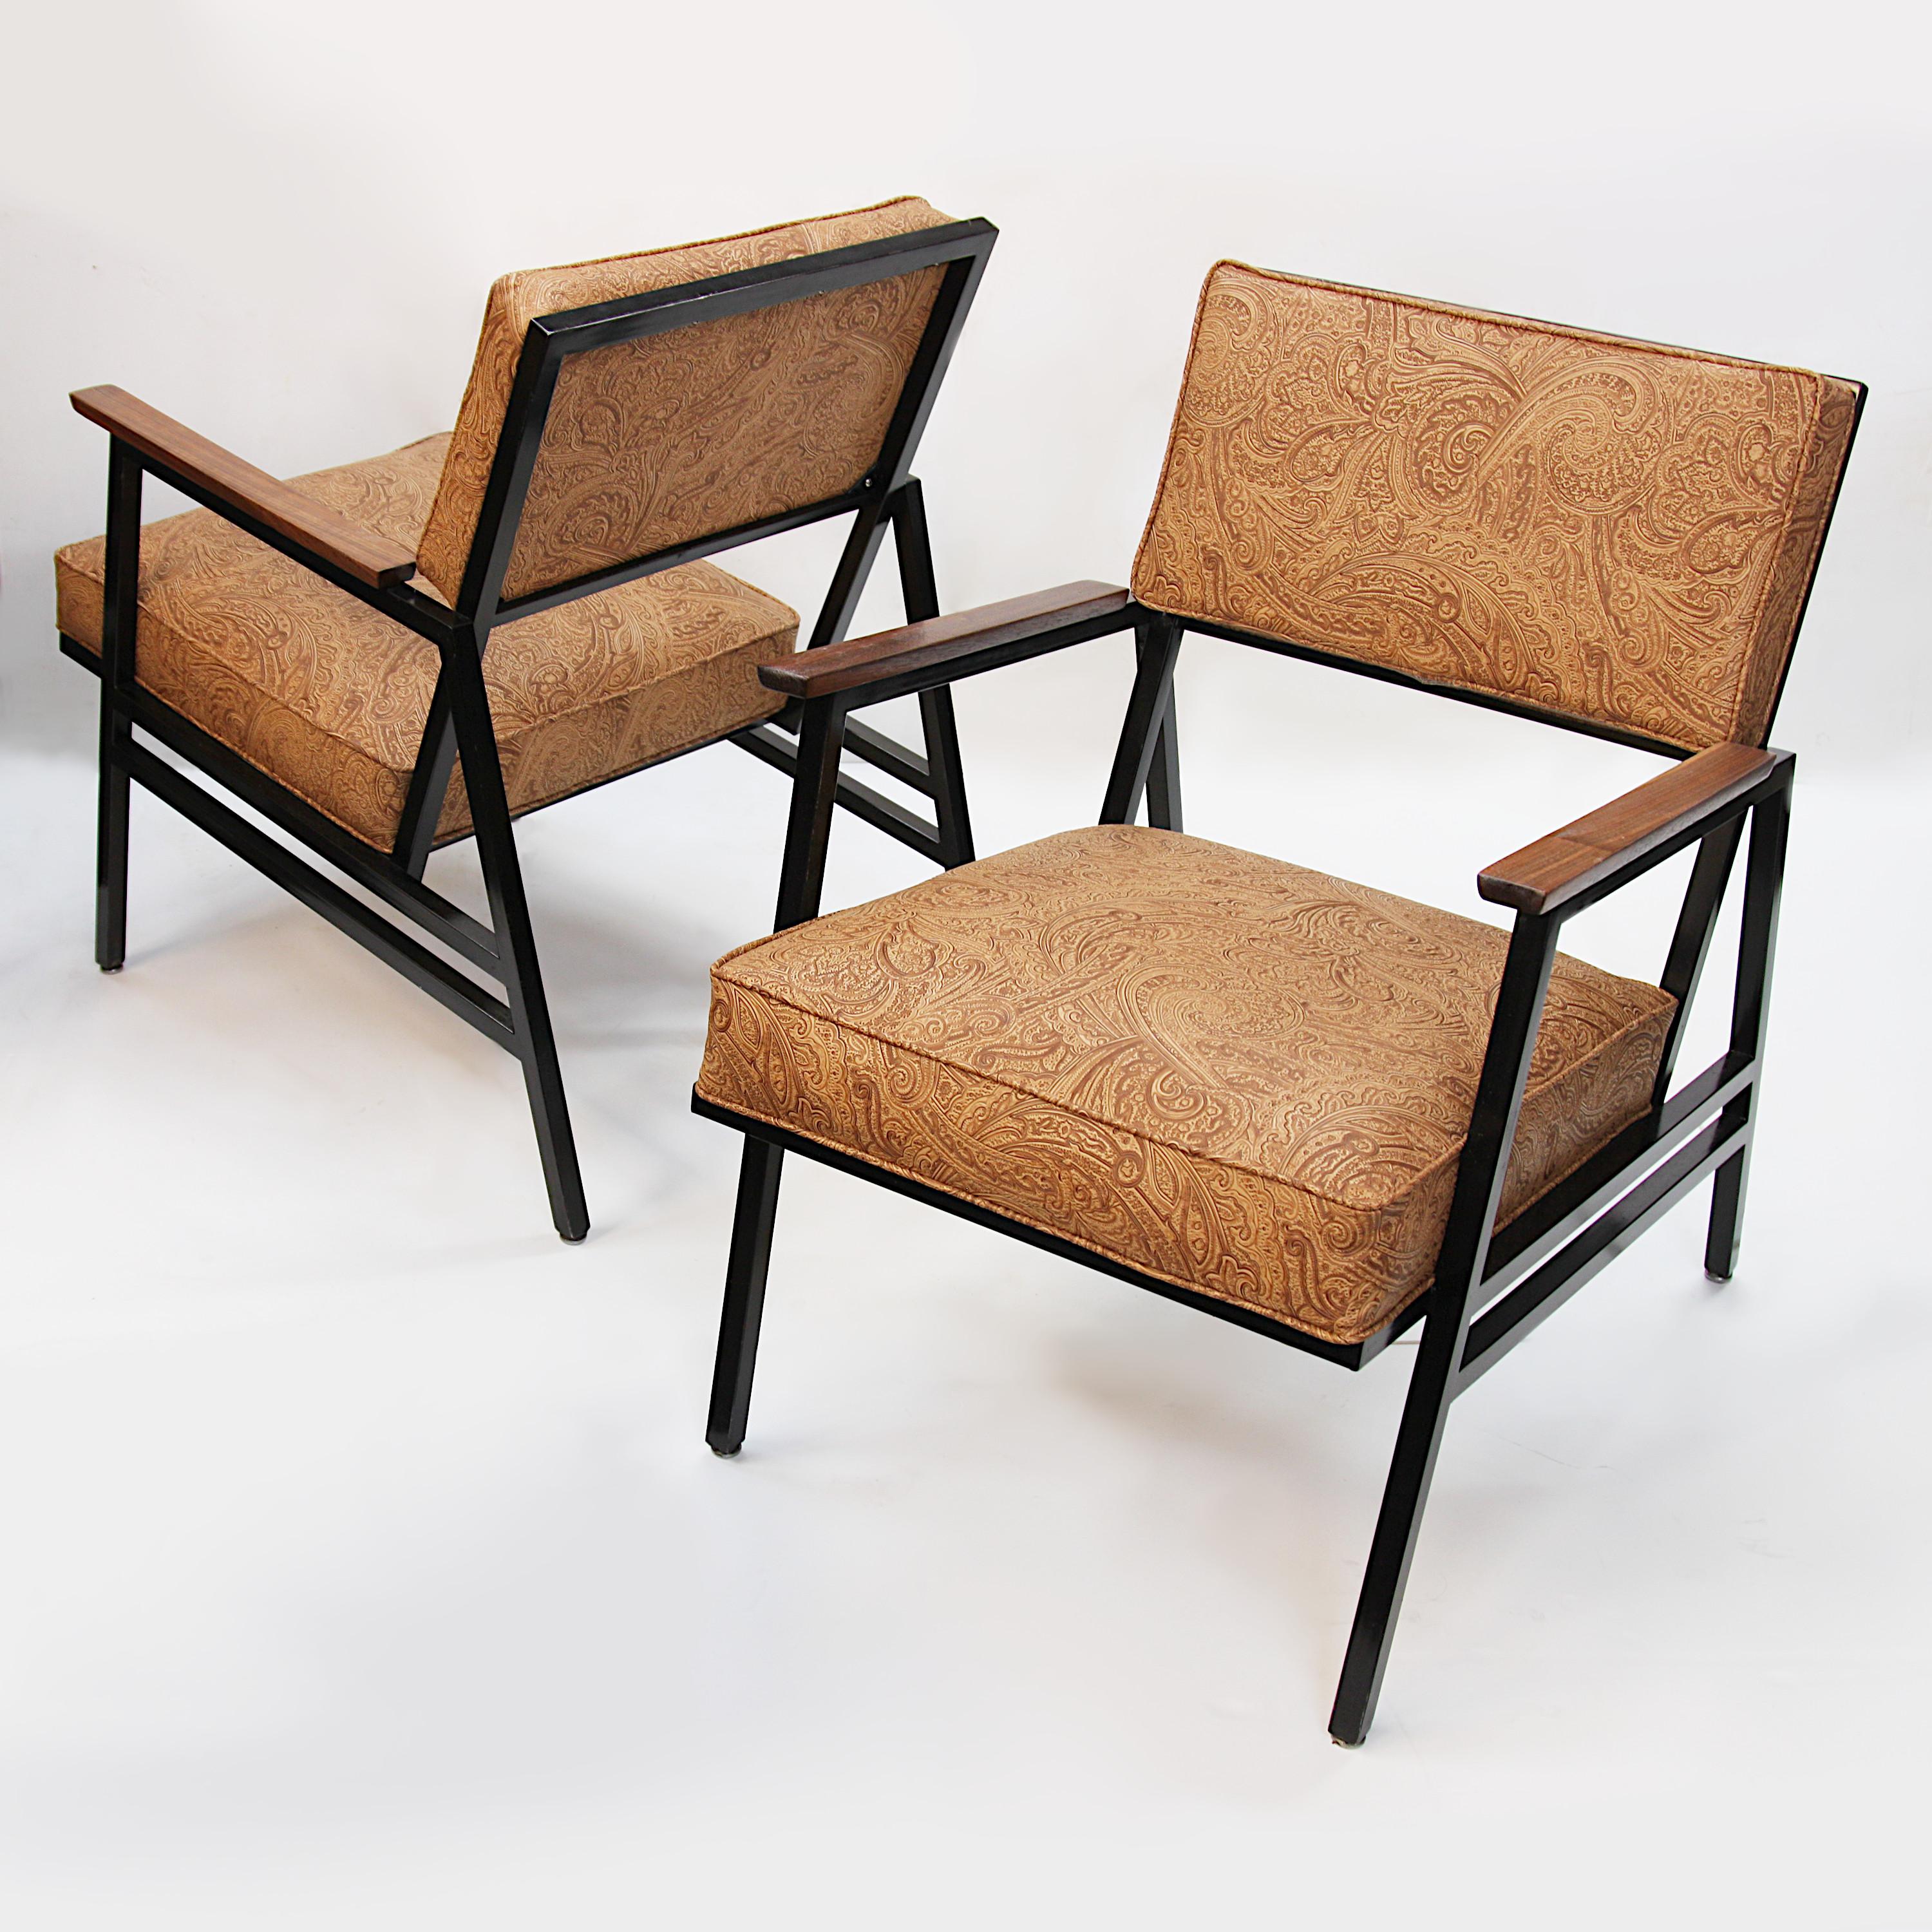 Charming pair of streel-frame arm chairs built in 1965 by Steelcase Inc. Chairs feature angular, black-painted steel frames, walnut armrests and new saddle-brown vinyl embossed with a classic, western-inspired, paisley motif. With their